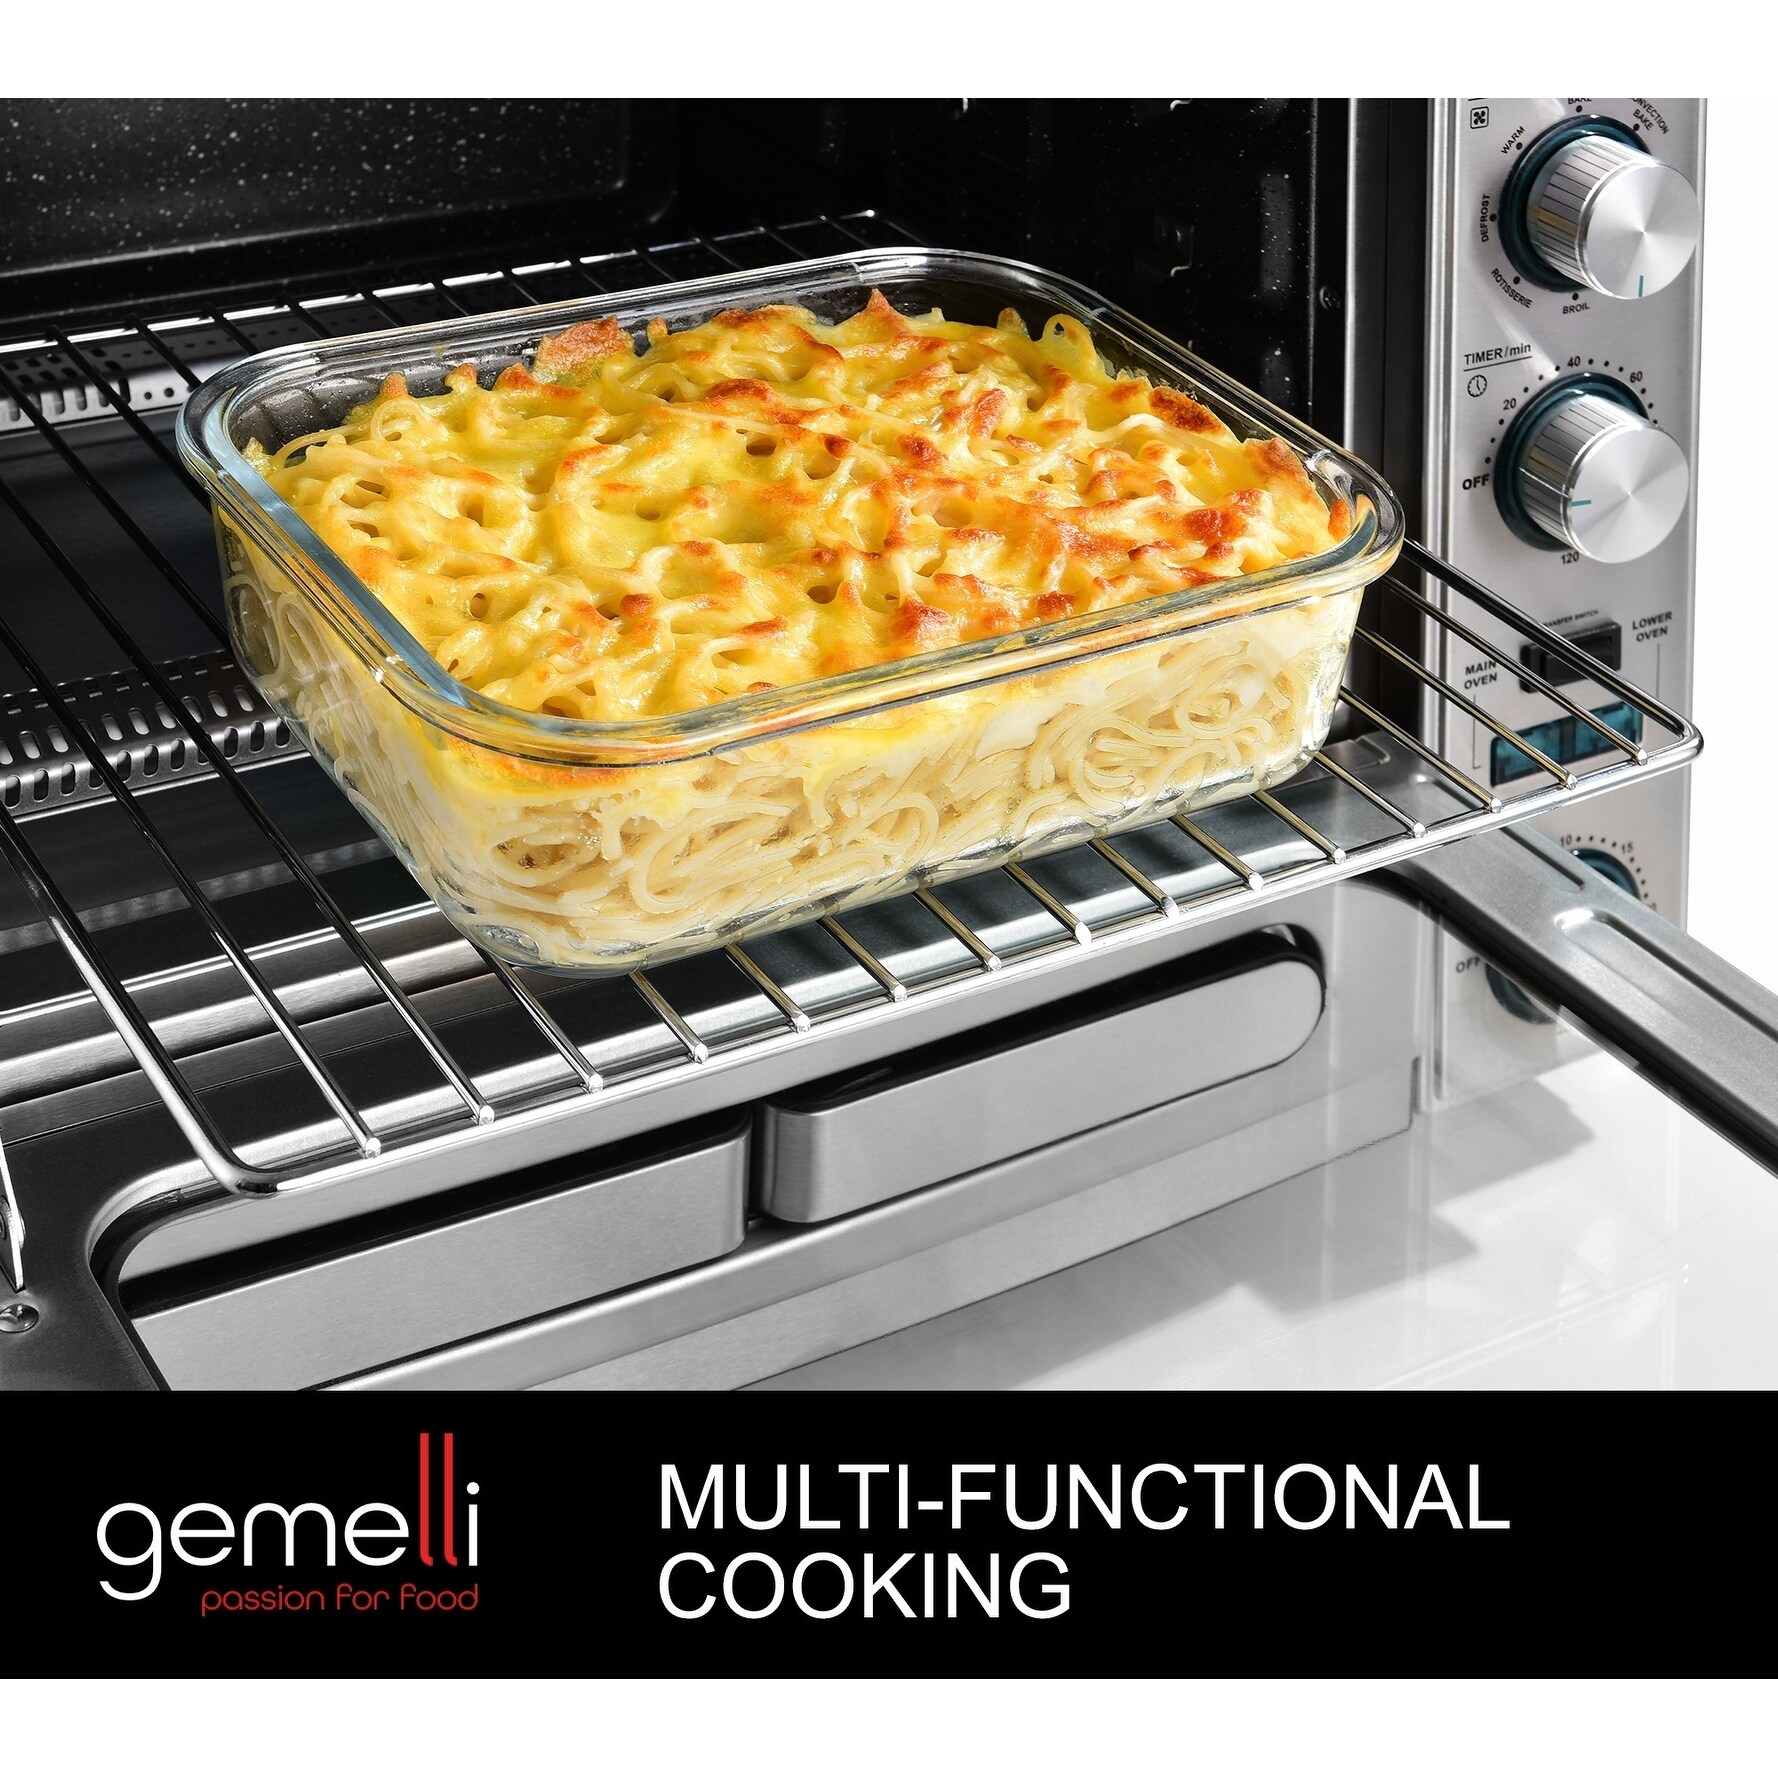 https://ak1.ostkcdn.com/images/products/27989355/Gemelli-Twin-Oven-Convection-Oven-with-Built-In-Pizza-Drawer-and-Rotisserie-Stainless-Steel-Finish-1ceb87f0-d4c0-4b37-be67-bc513599e434.jpg